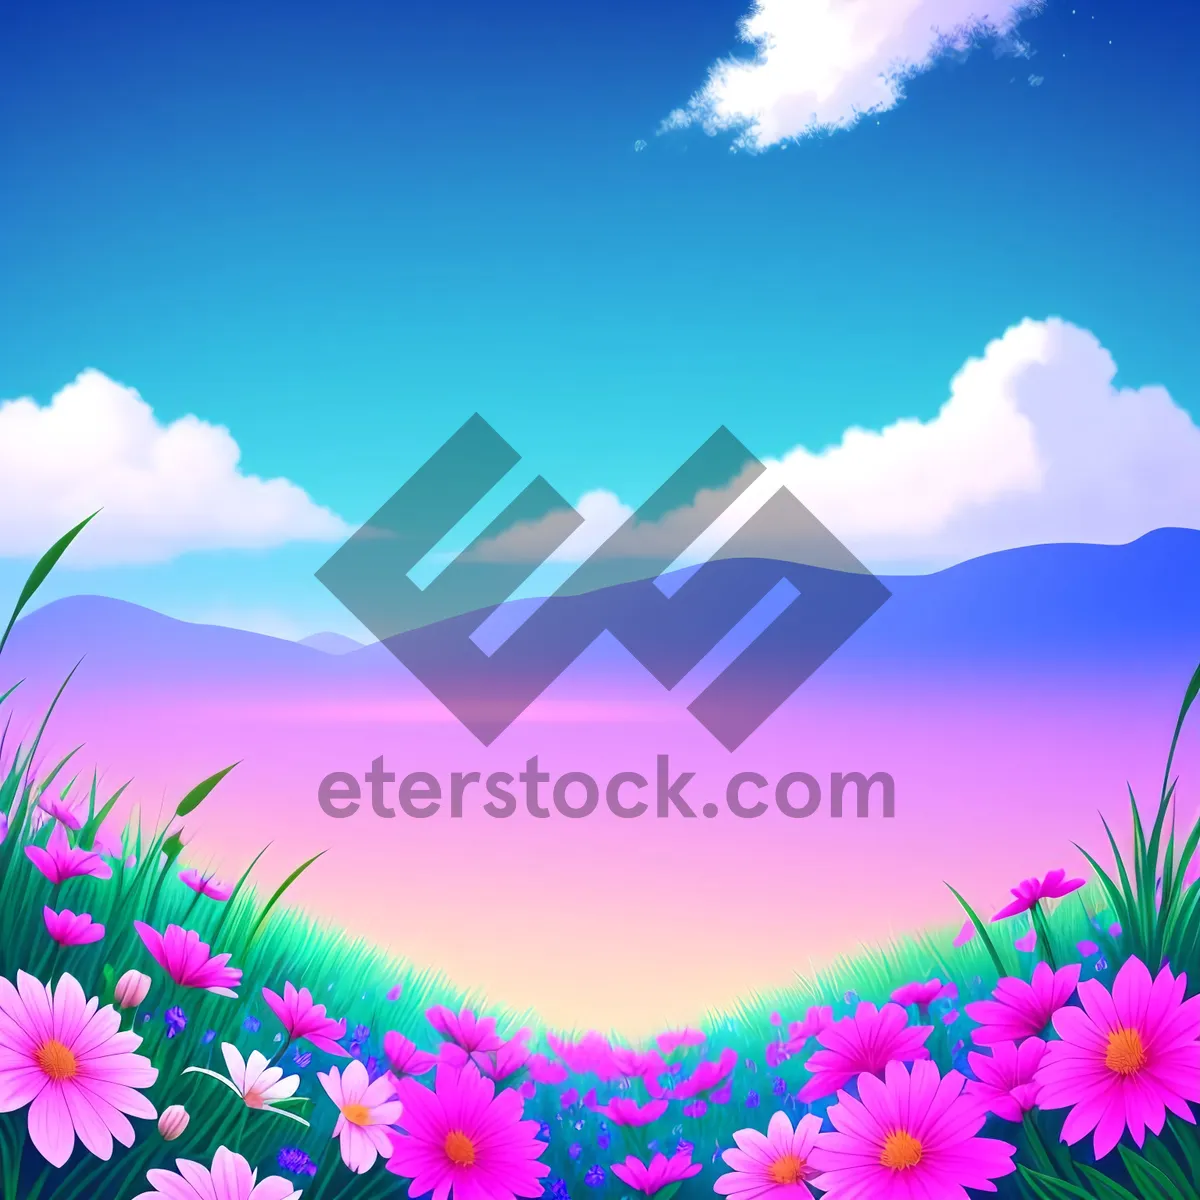 Picture of Summer Sunlight Over Vibrant Meadow Landscape